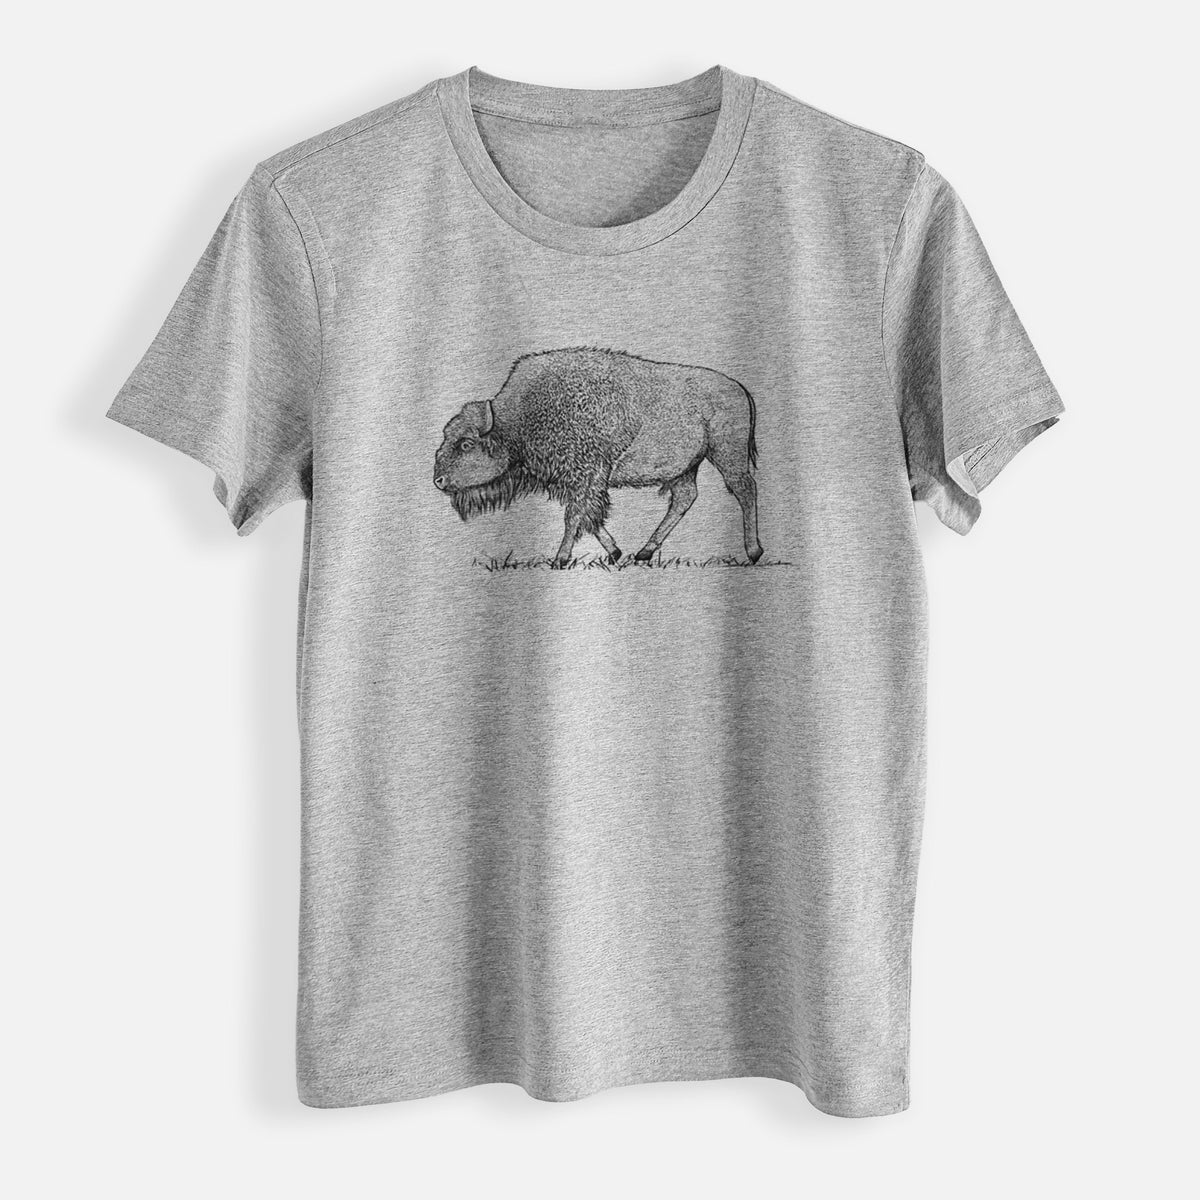 American Bison / Buffalo - Bison bison - Womens Everyday Maple Tee